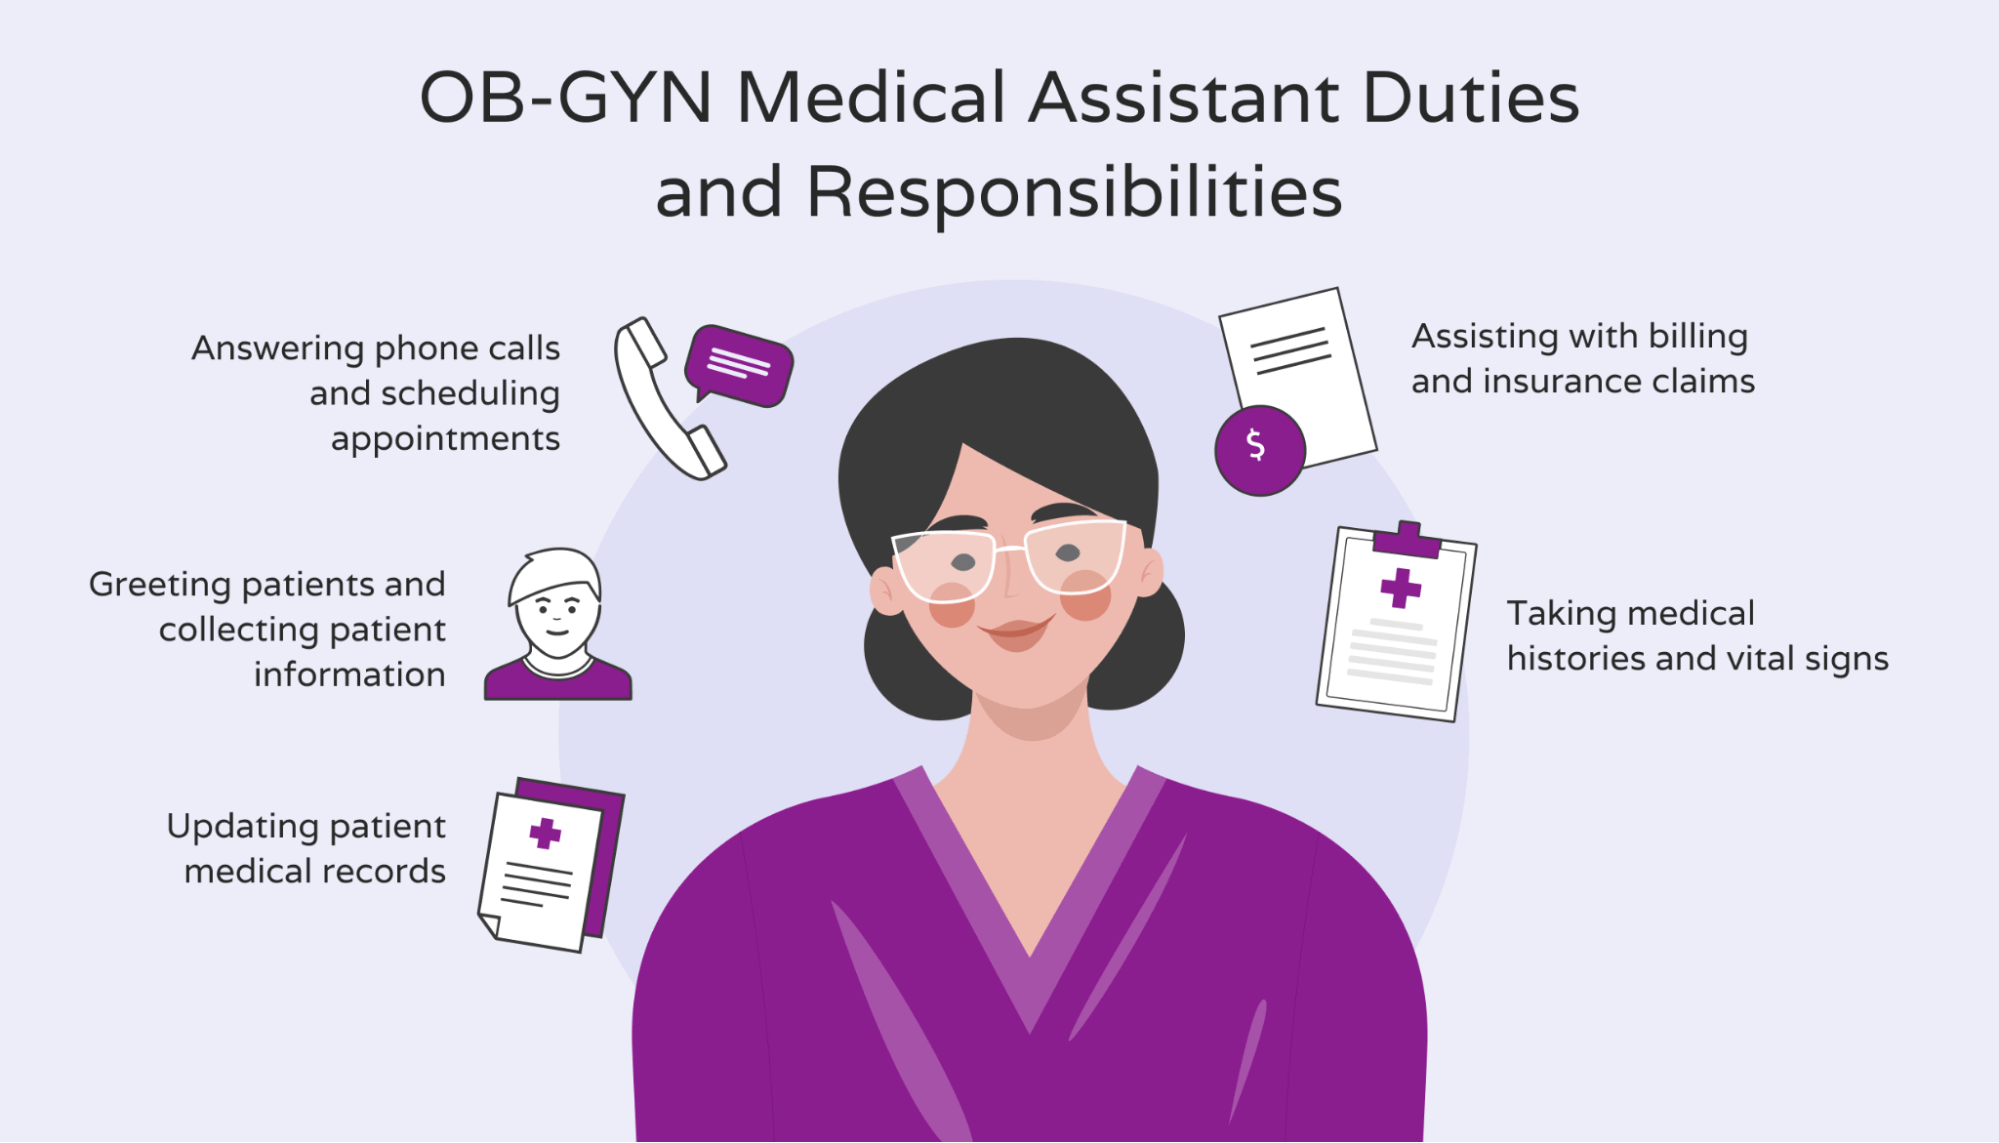 Common duties of an Ob Gyn medical assistant